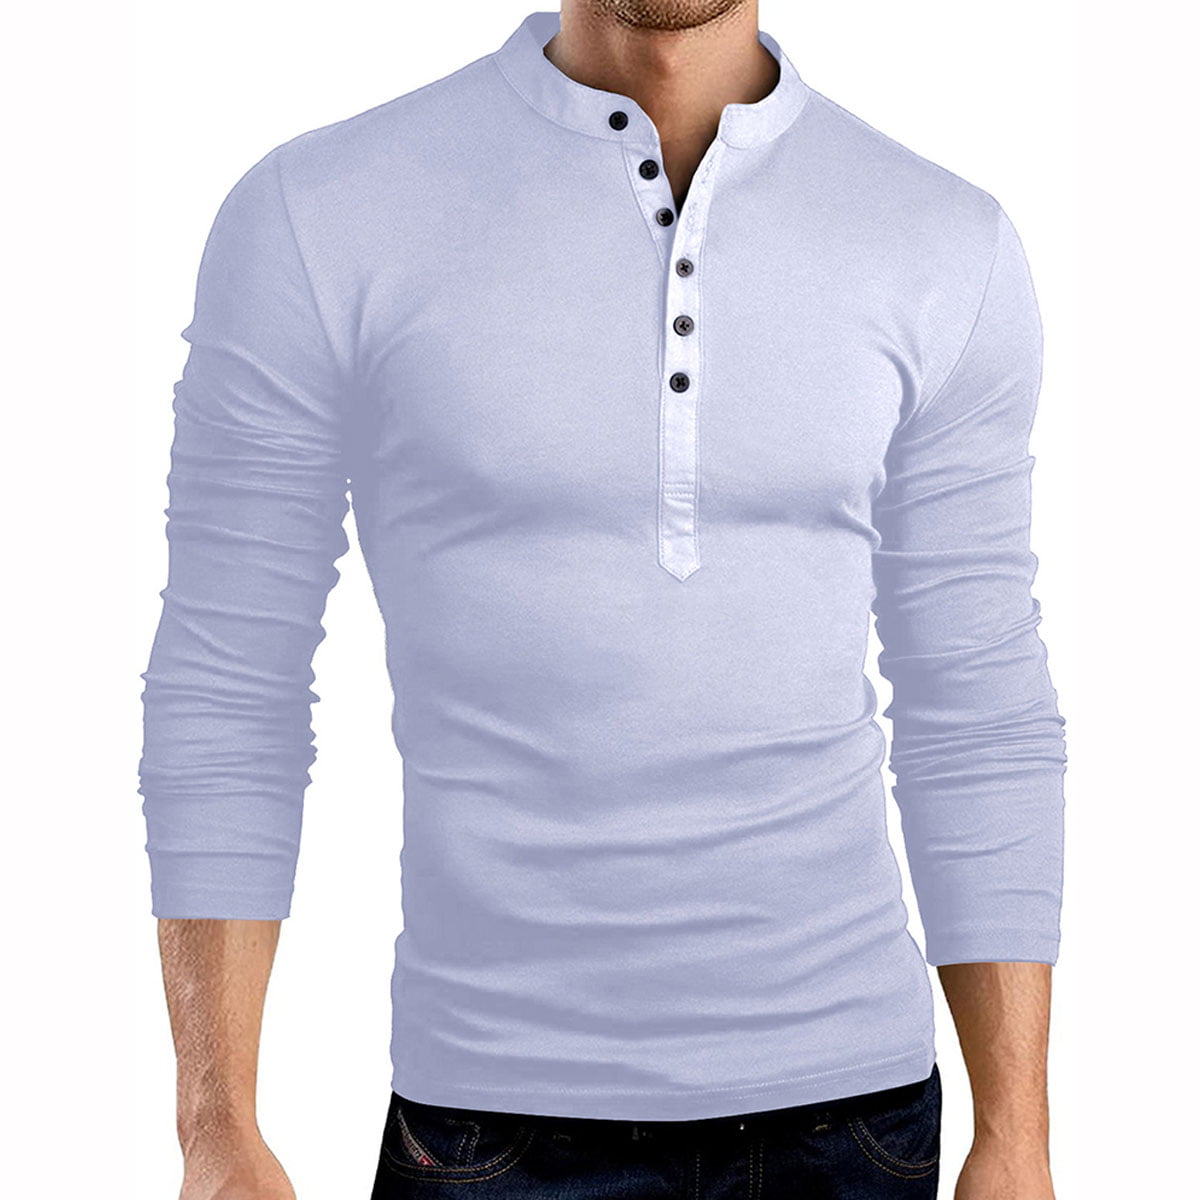 Men's Slim Fit V Neck Long Sleeve Muscle Tees T-shirt Casual Shirts Tops Blouse 